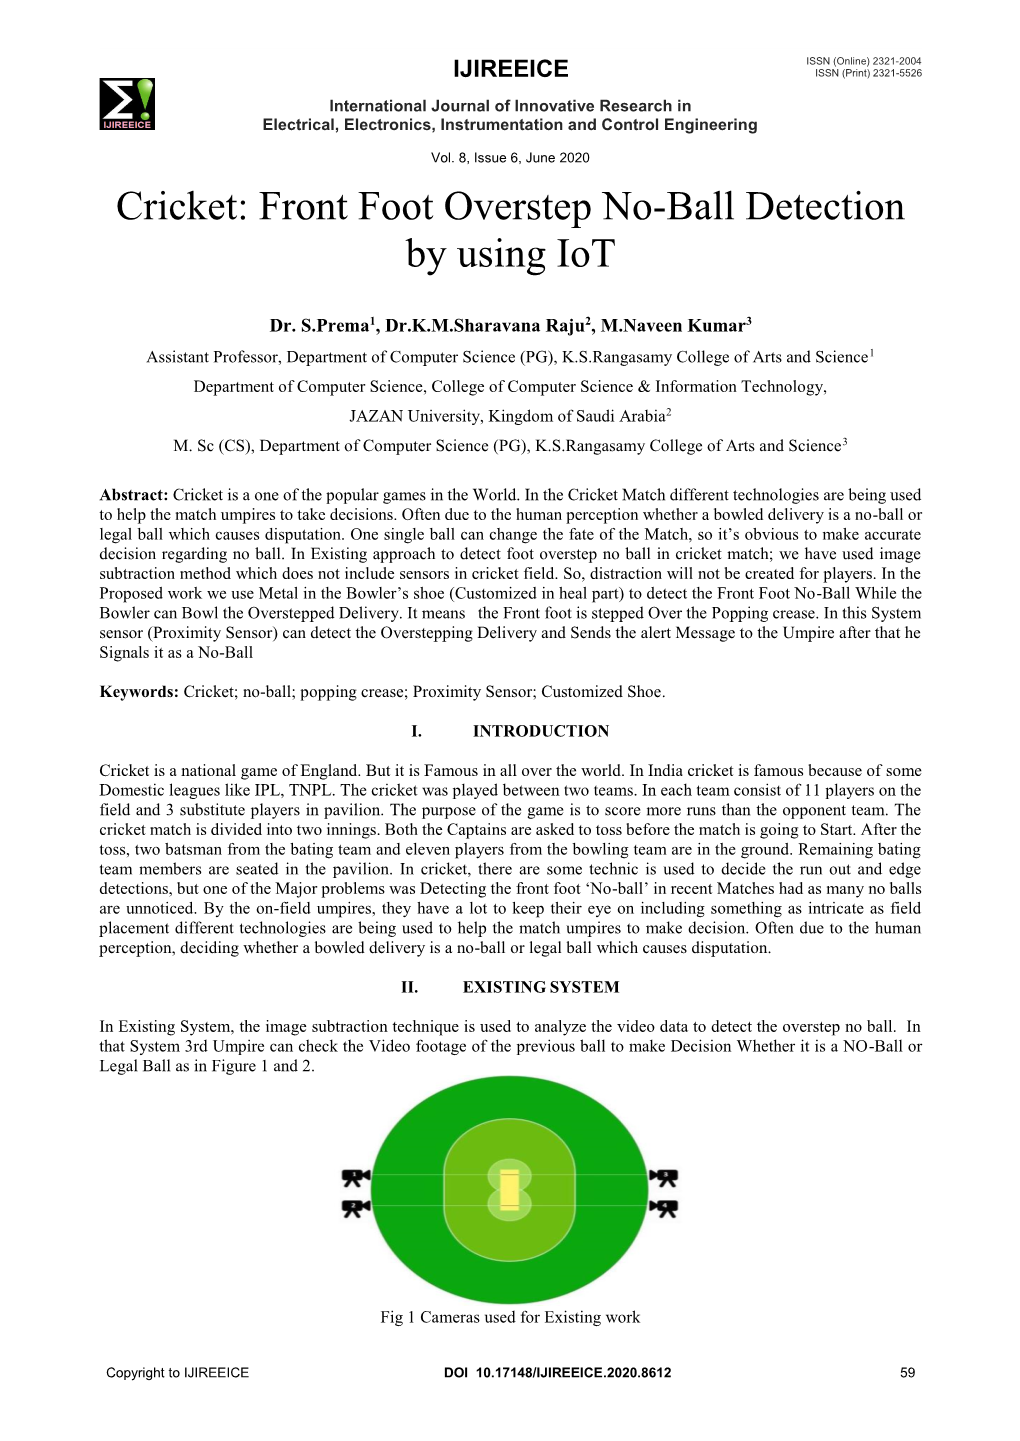 Cricket: Front Foot Overstep No-Ball Detection by Using Iot